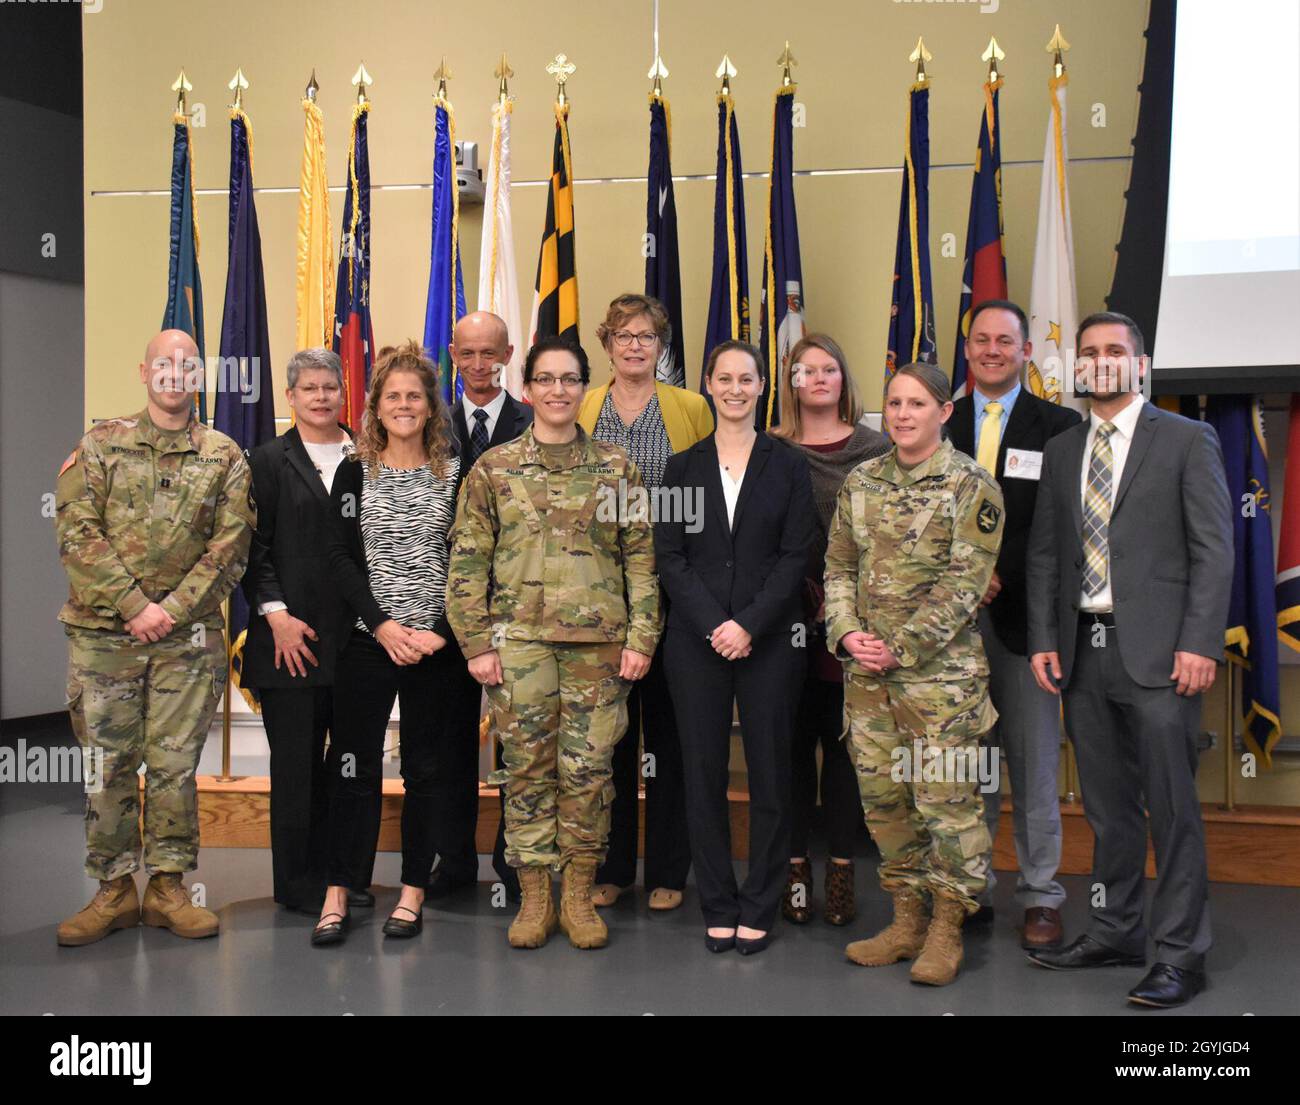 Members of the Warfighter Deployed Medical Systems Project Management Office and others who helped organize the 2020 Hospital Center Conversion Summit, gather for a photo. From left to right:  Army Capt. Scott Wynocker, Marie Cochran, Sage Norton, Stephen Matthews, Army Col. Gina Adam, Rene Smith, Lindsay Longobardi, Michelle Ehlert, Army Maj. Janessa Moyer, Timothy Hales, and Juston Donadieu. (Photo taken by Jeffrey Soares, USAMMDA Public Affairs) Stock Photo